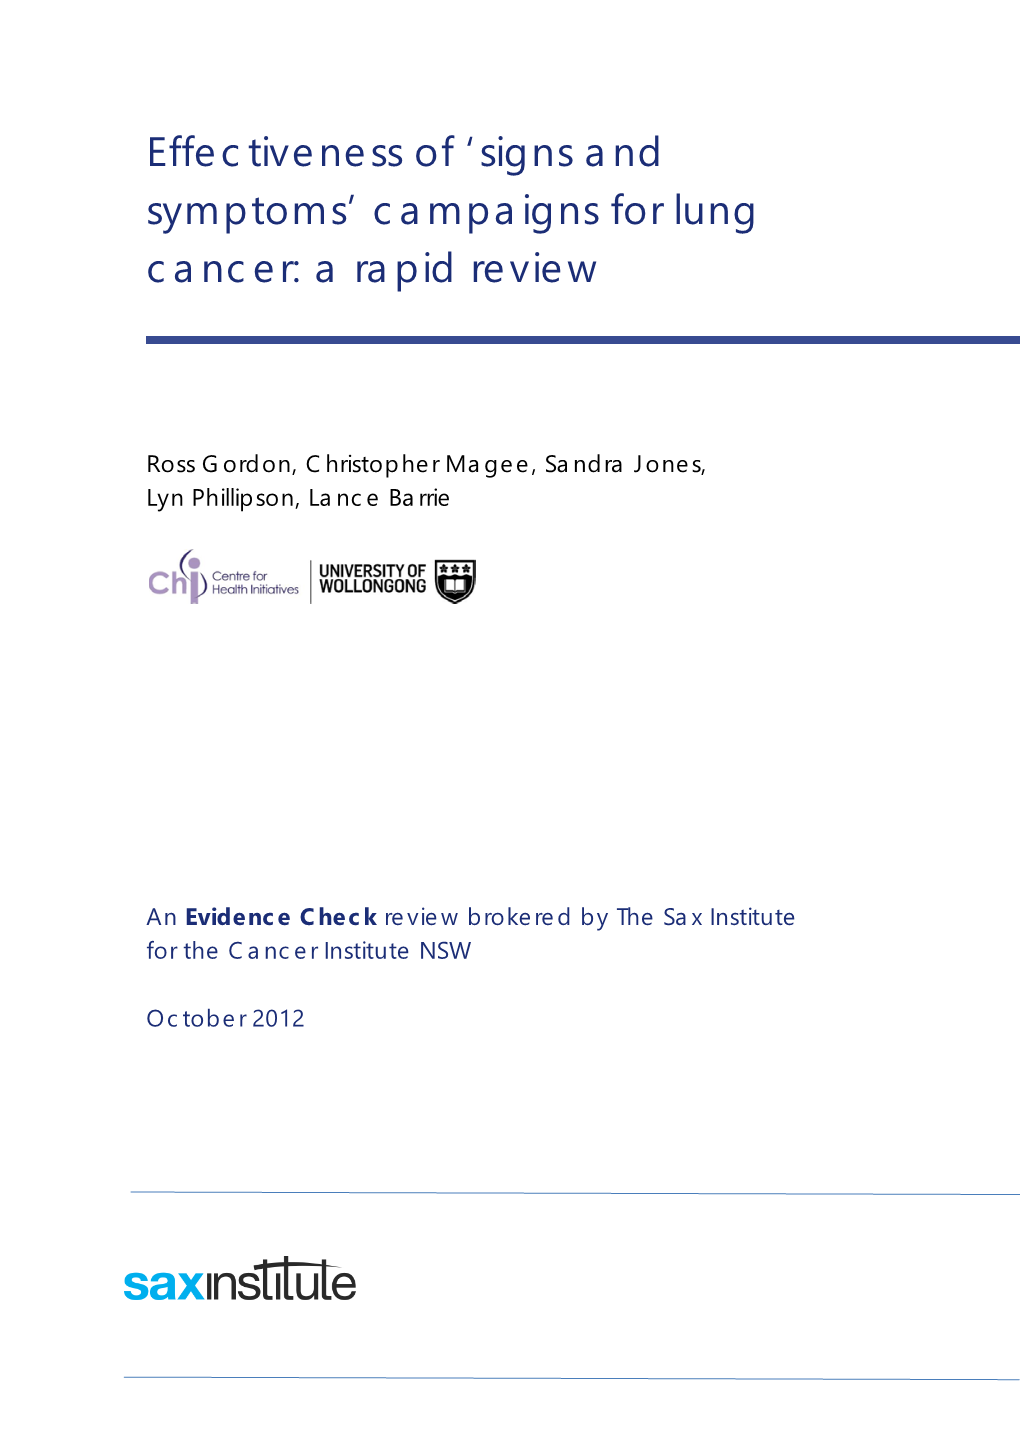 'Signs and Symptoms' Campaigns for Lung Cancer: a Rapid Review